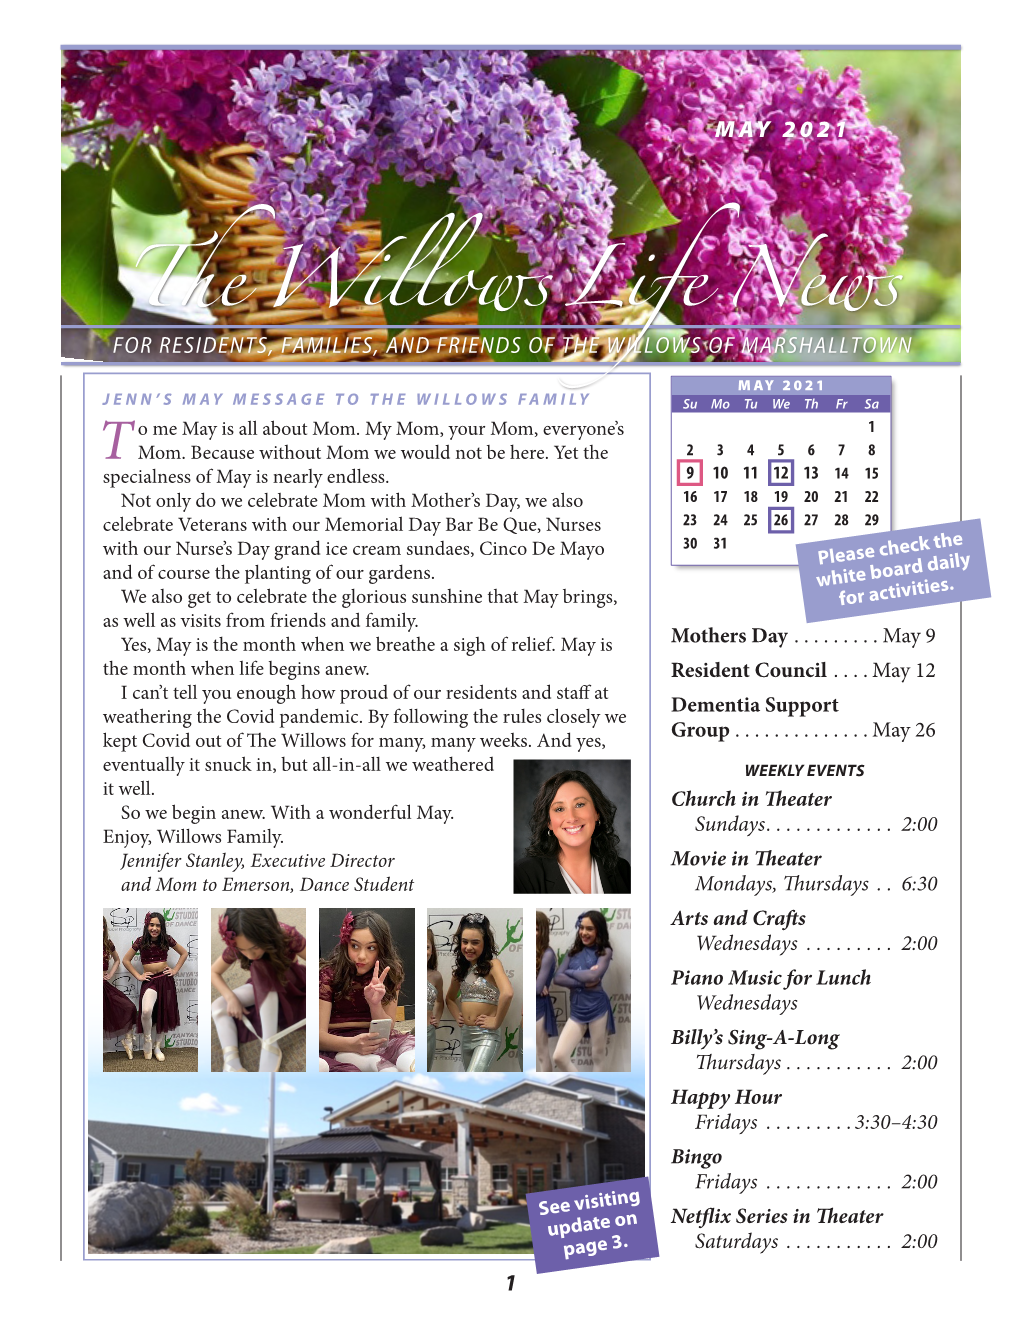 The Willows Life News / May 2021